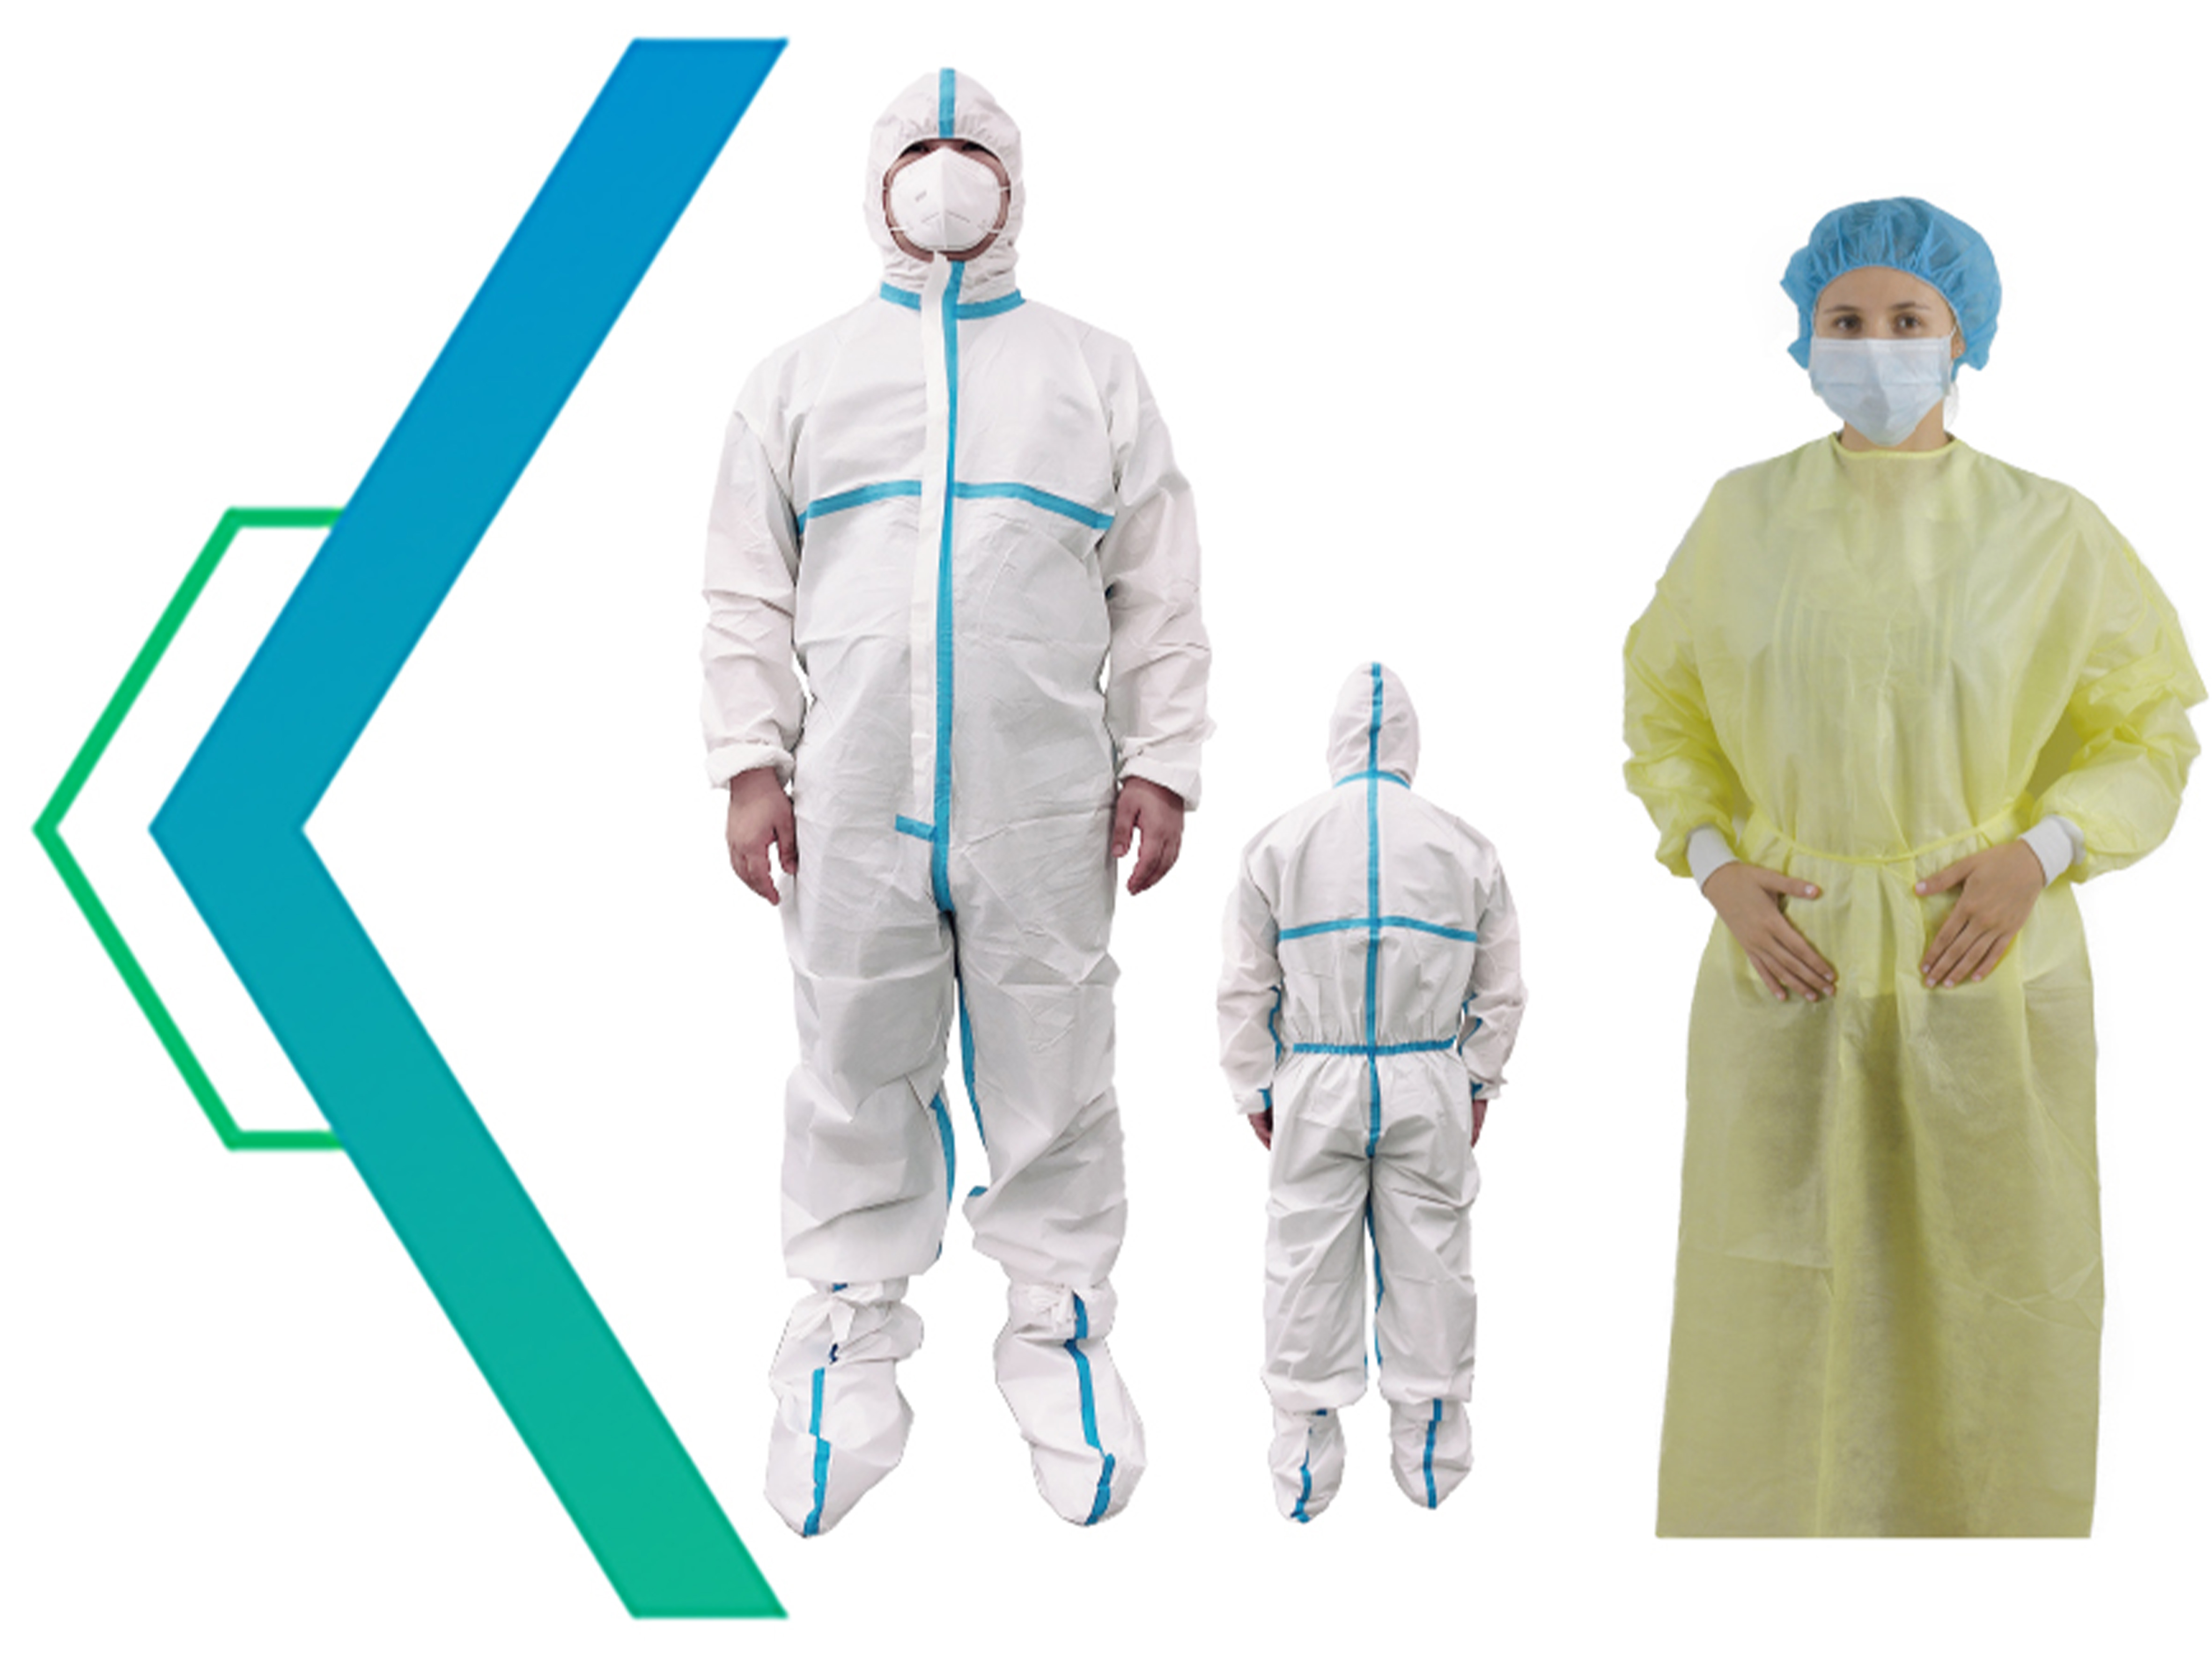 Isolation Gowns vs. Coveralls: Which Offers Better Protection?